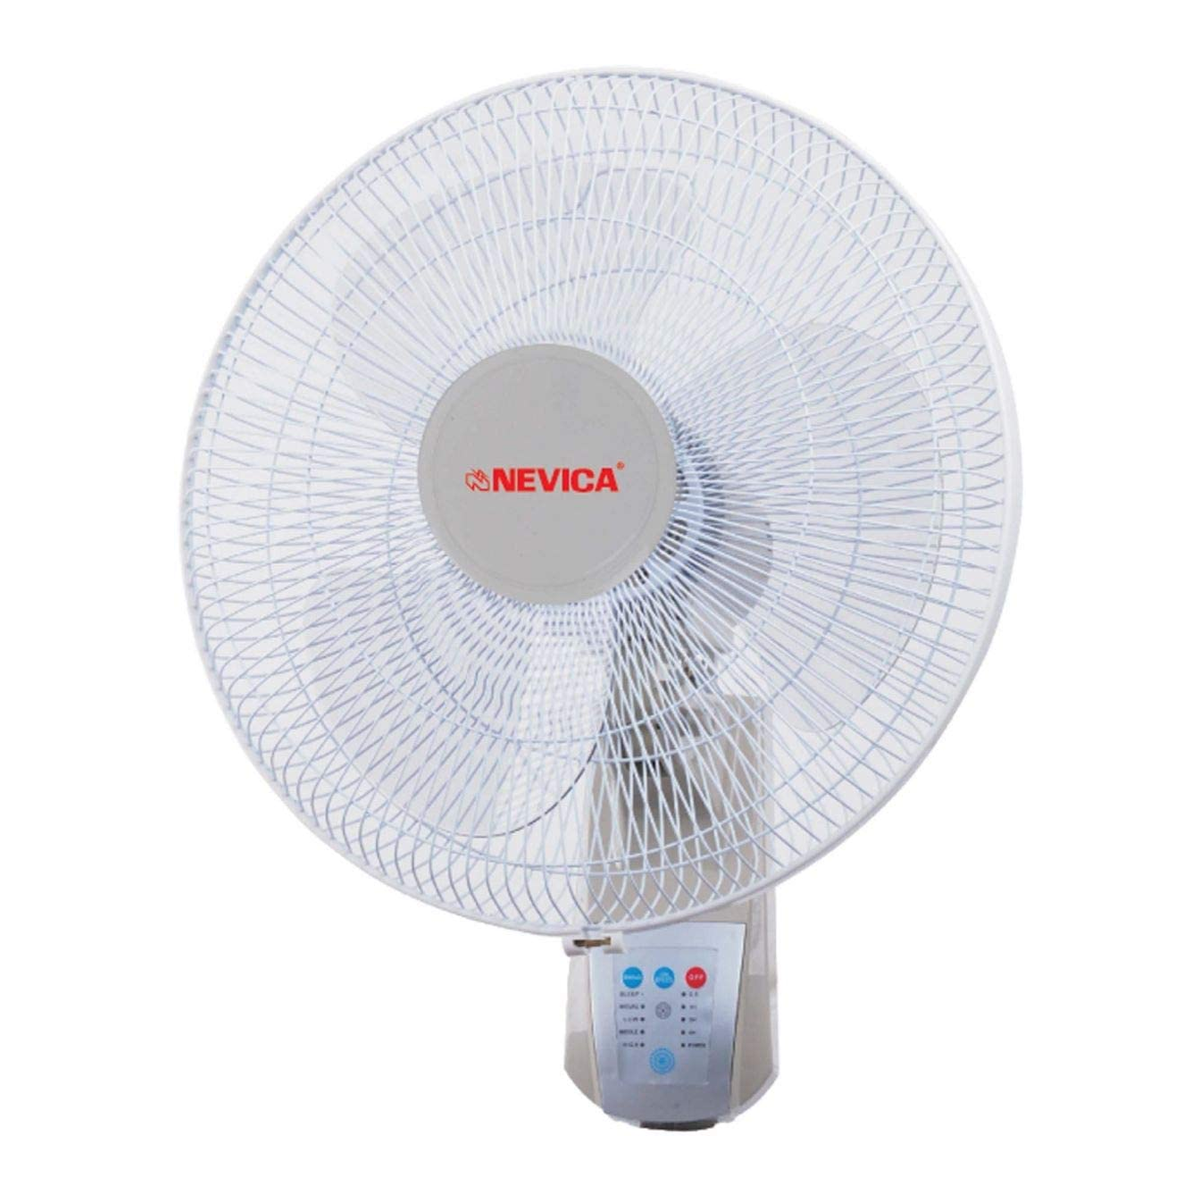 Nevica 16" Wall Fan with Remote control (Model: NV-24WFR)